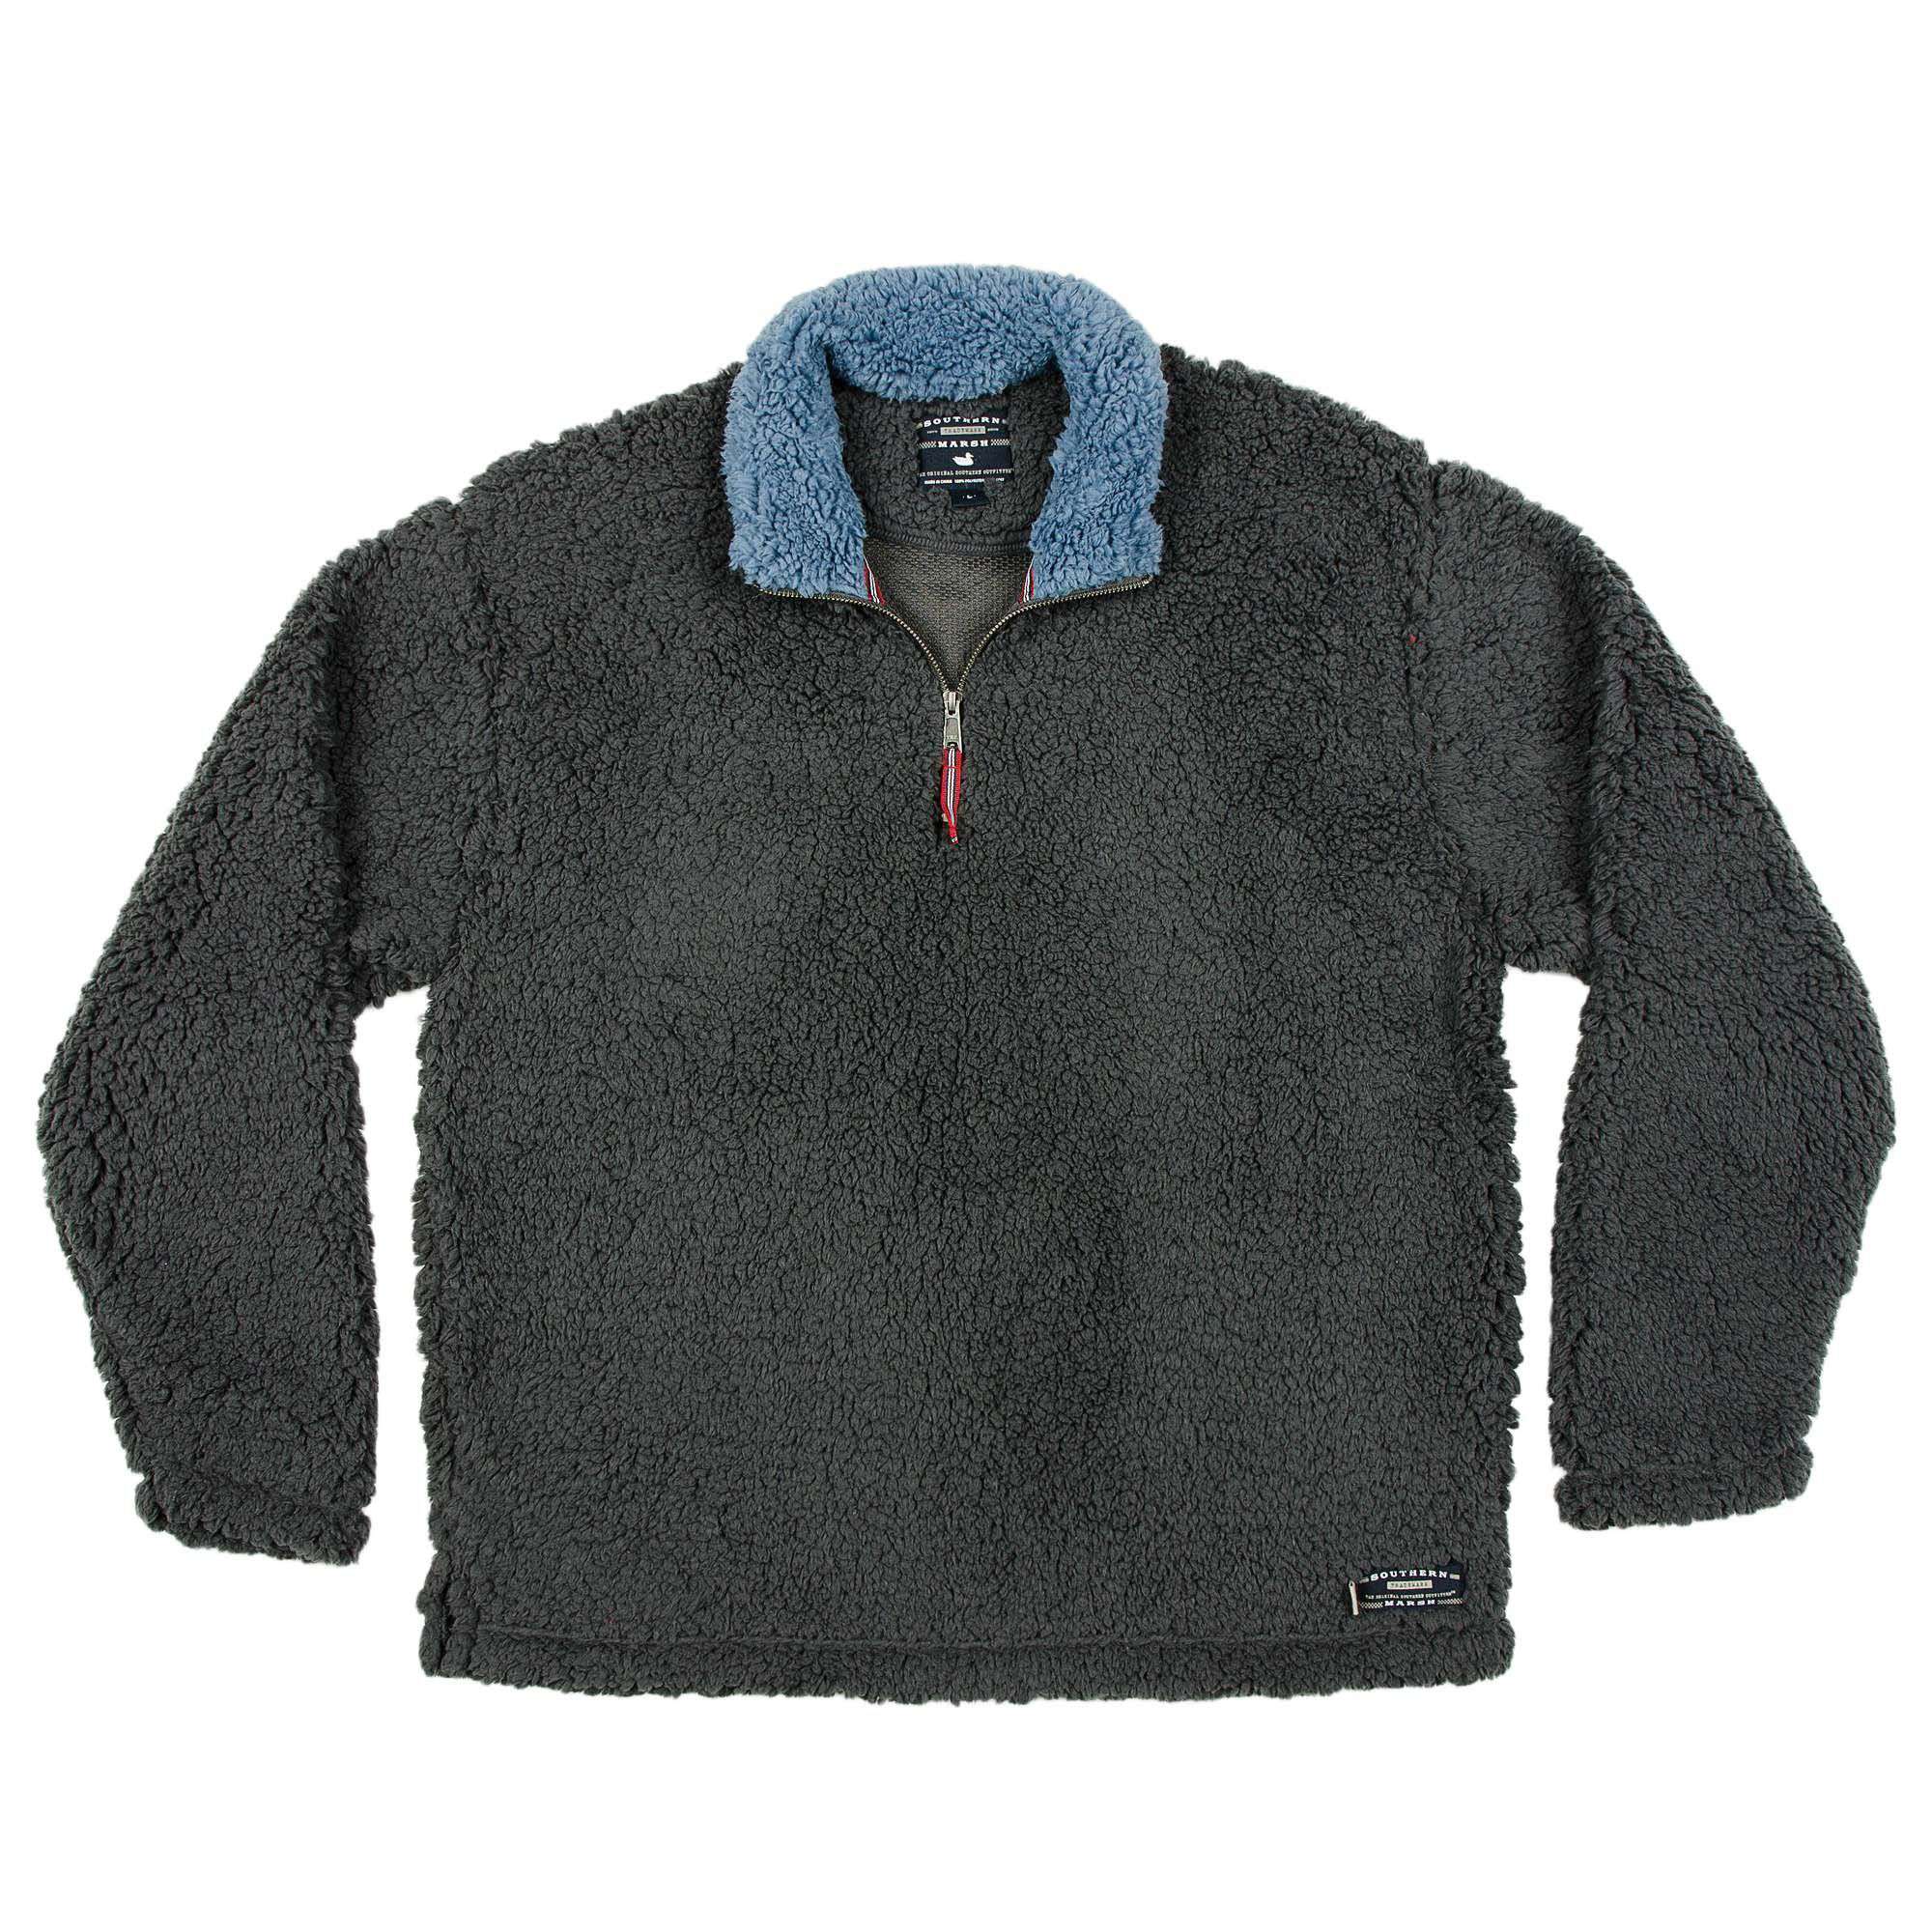 Appalachian Pile Pullover 1/4 Zip in Midnight Grey by Southern Marsh - Country Club Prep